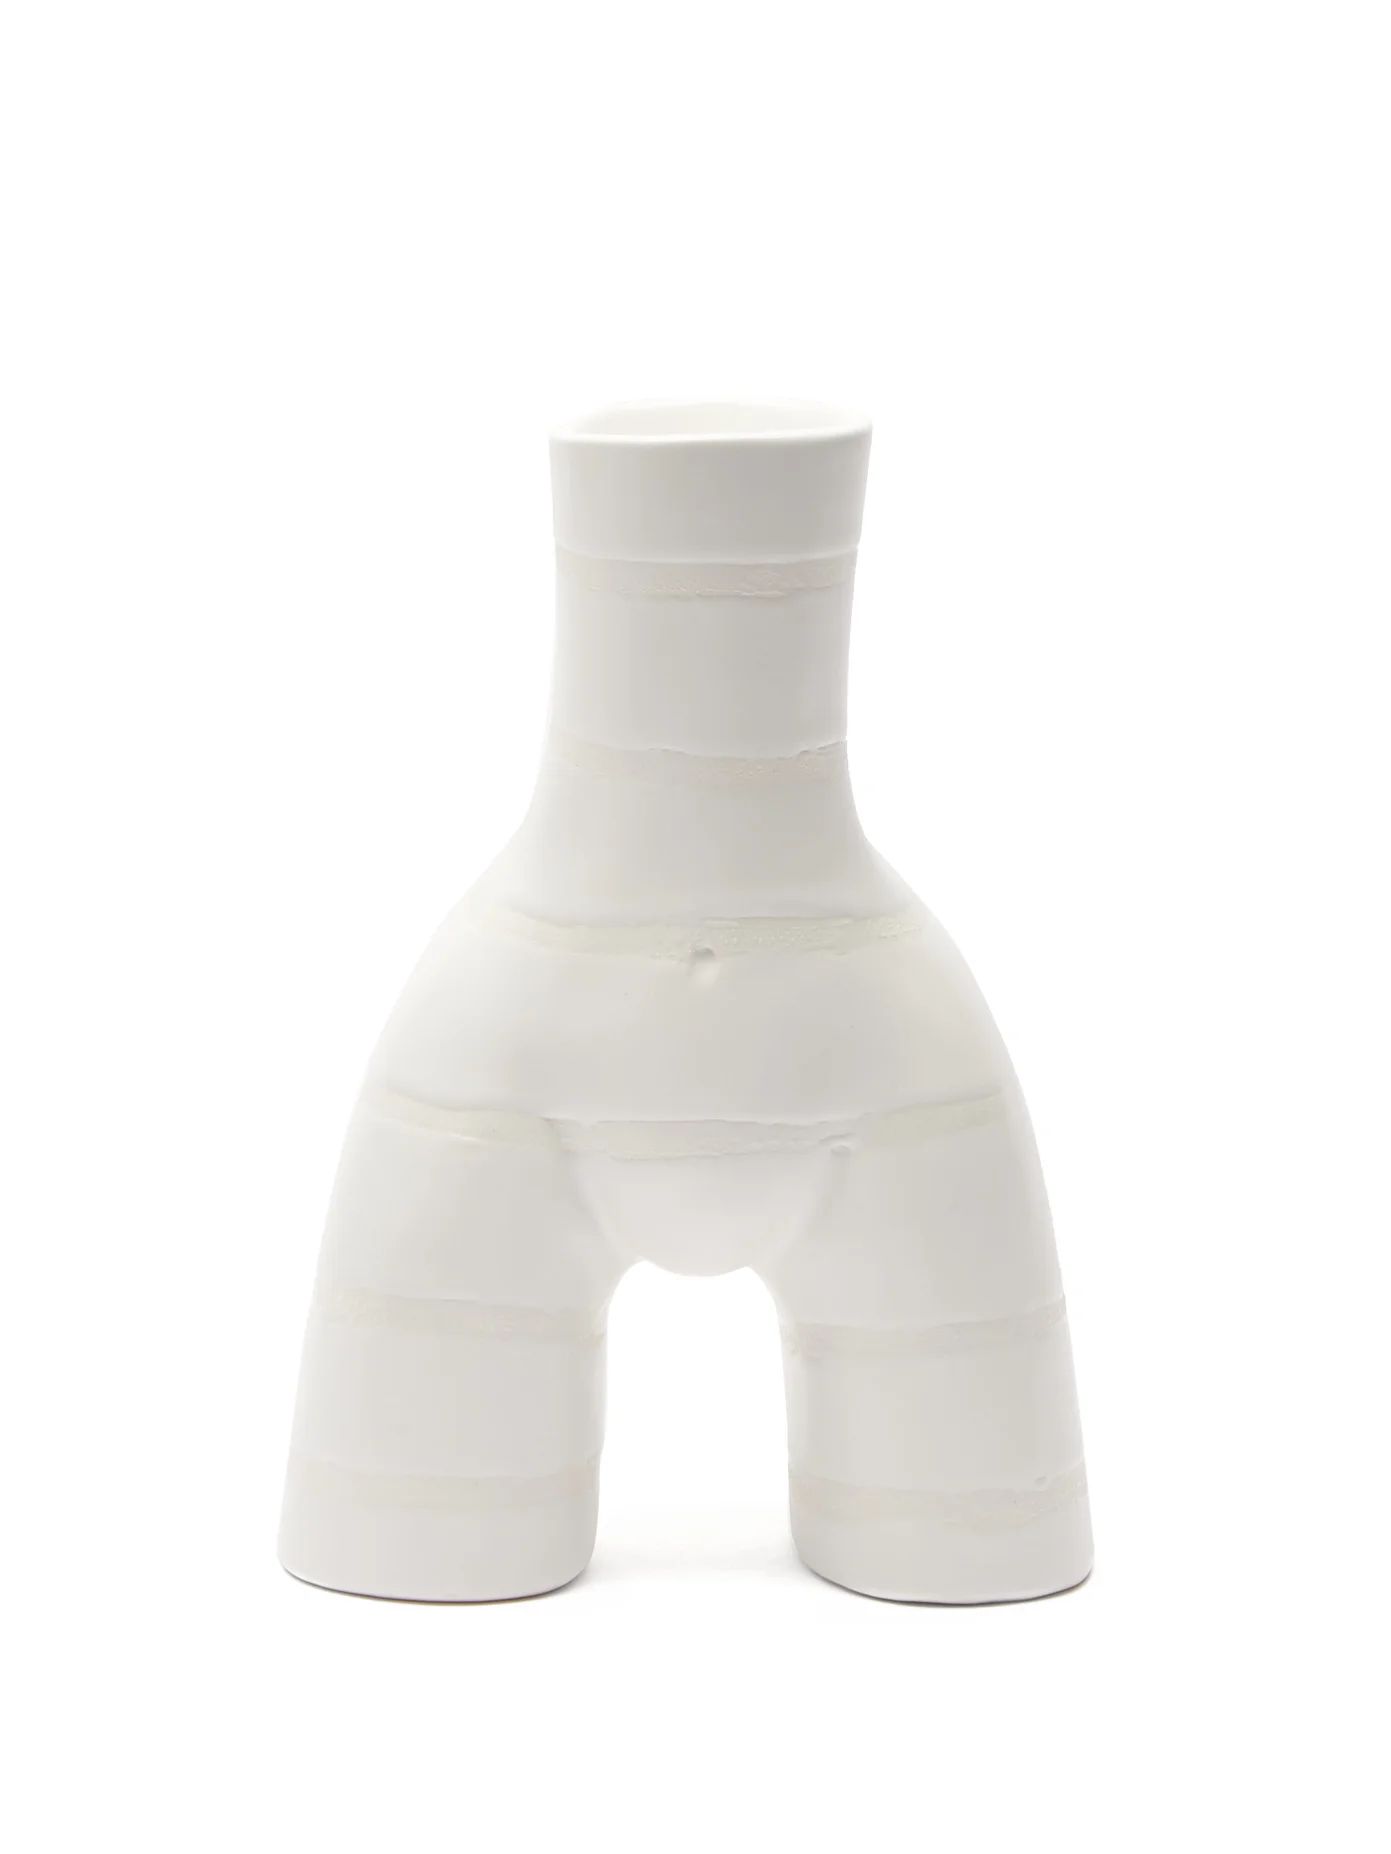 Single L'Egg striped ceramic egg cup | Matches (US)